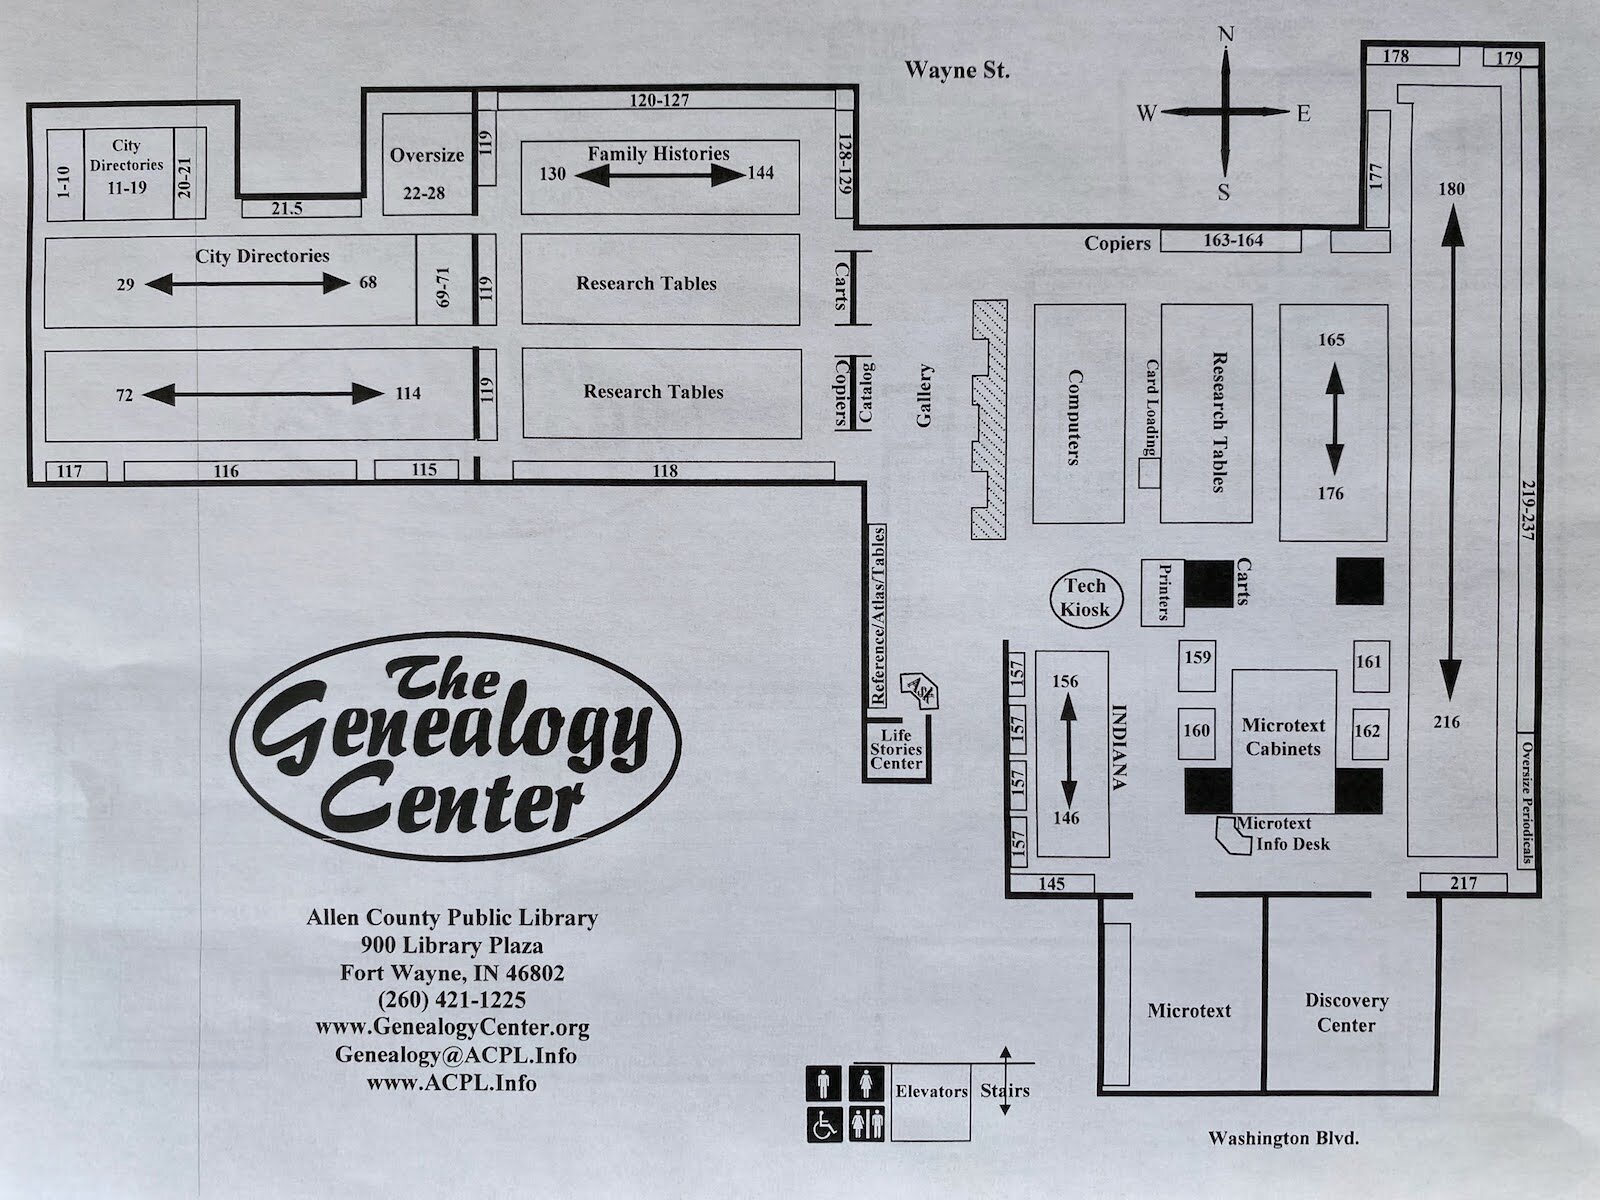 A map of the Allen County Public Library's renowned Genealogy Center.